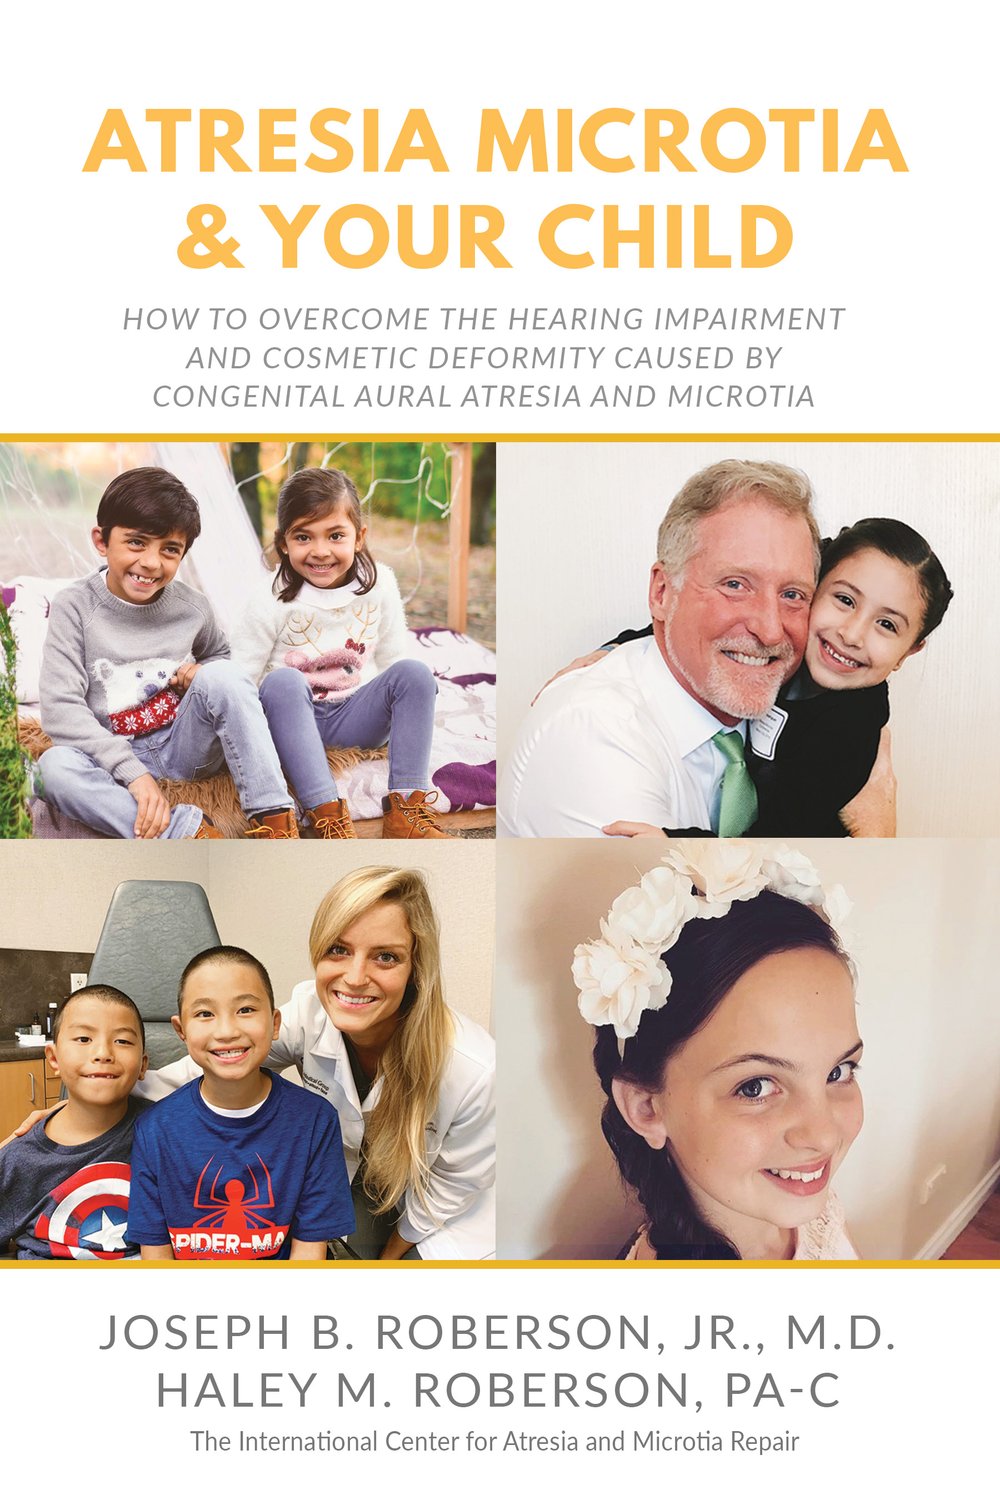 Atresia Microtia and Your Child: How to Overcome the Hearing Impairment and Cosmetic Deformity Caused by Congenital Aural Atresia and Microtia (by Joseph B. Roberson, Jr., M.D. and Haley M. Roberson, PA-C)